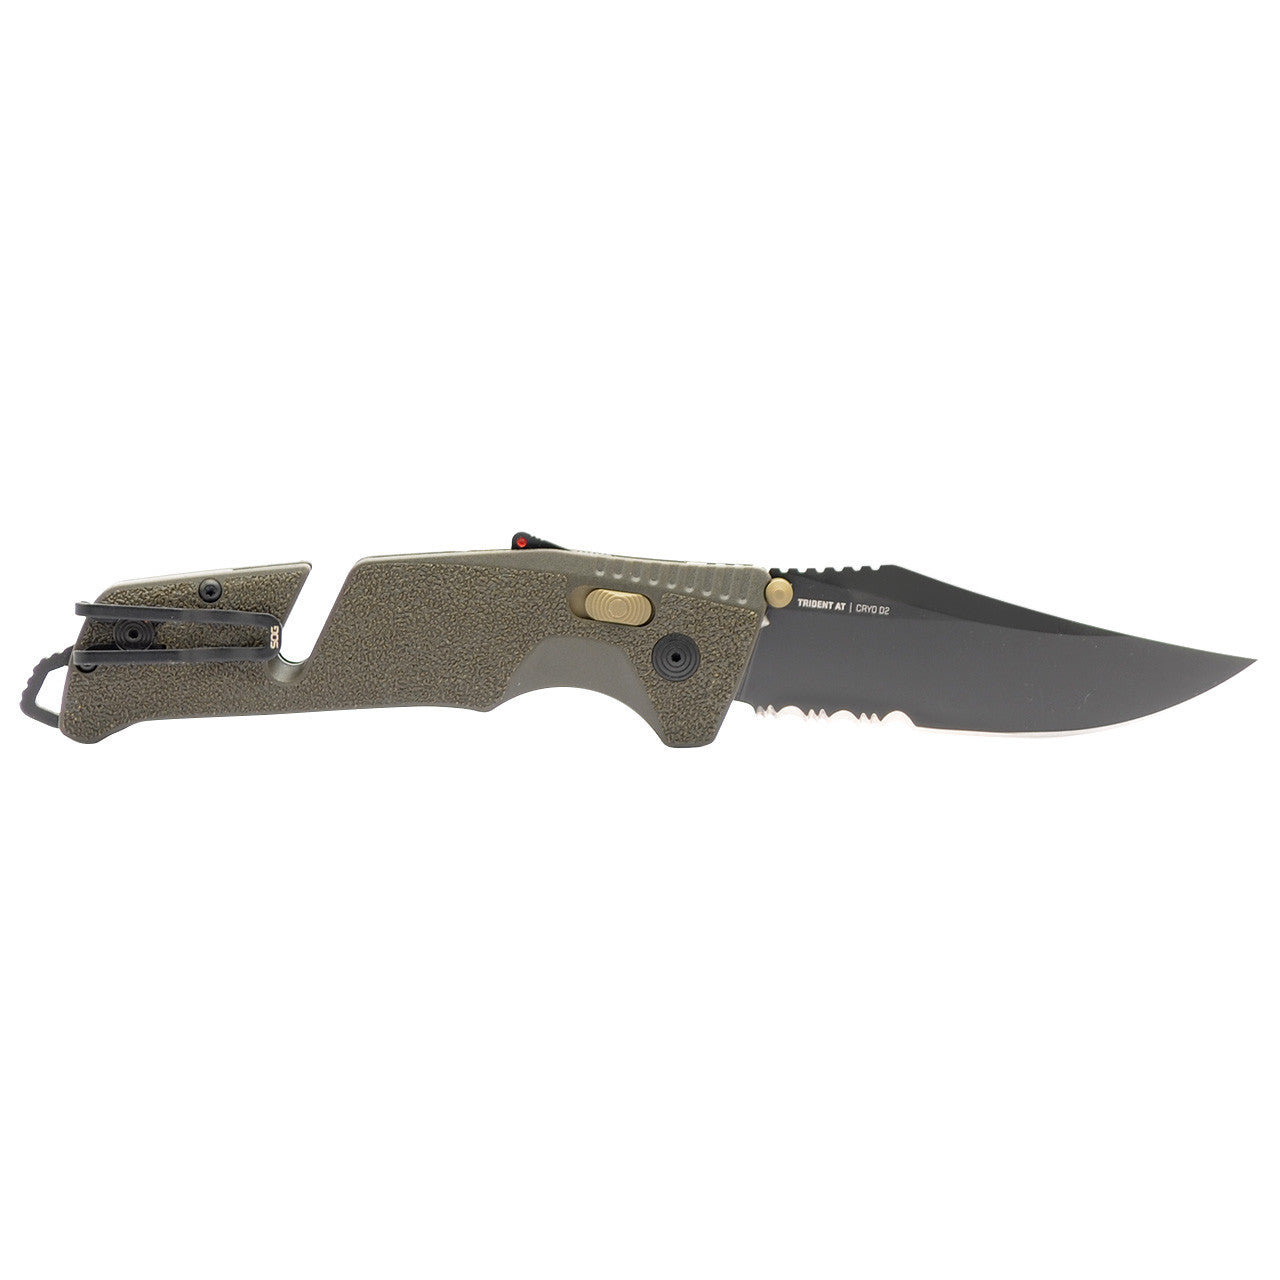 SOG Trident AT Assisted Folding Knife – Olive Drab w/ Partial Serration